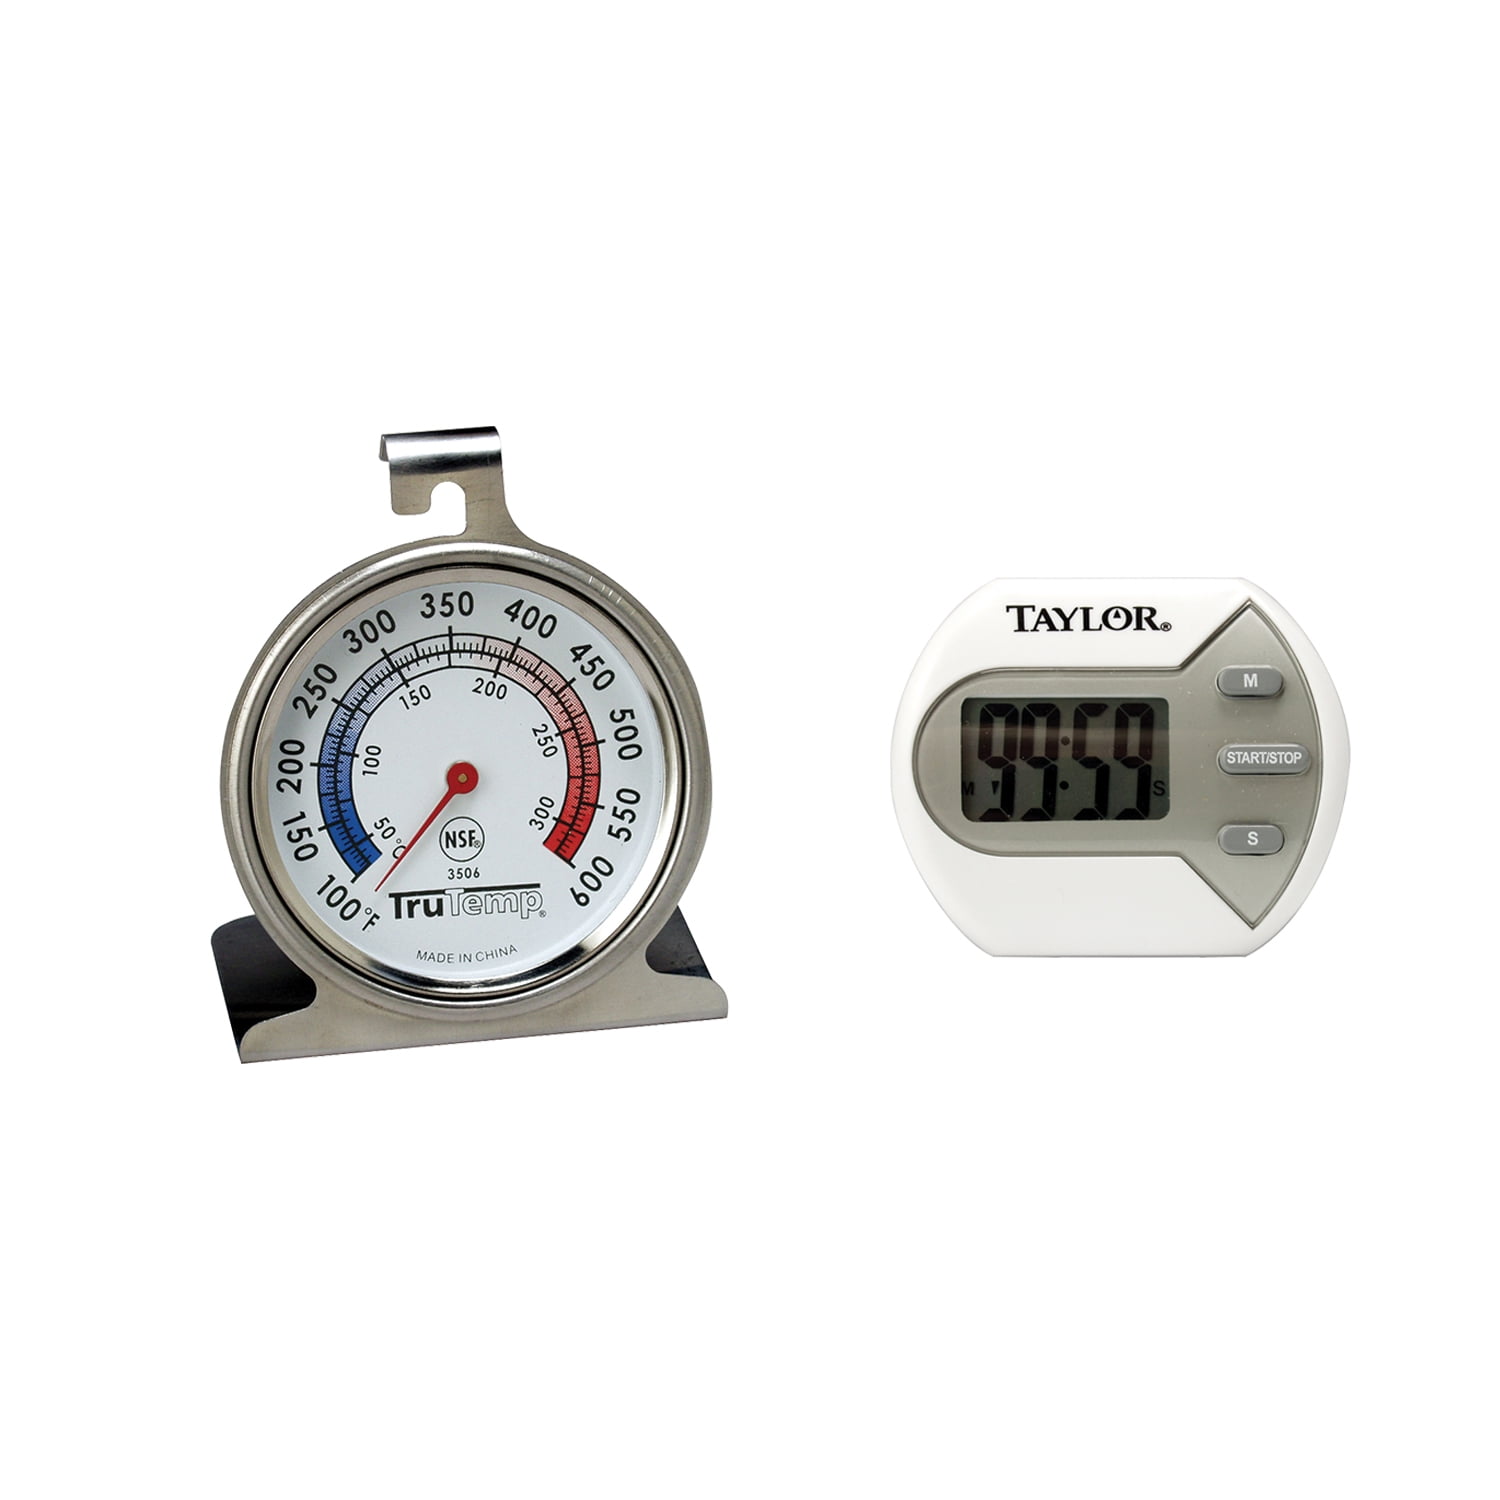 Oven Thermometer Series Large Dial Thermometer 100 to 600 Degrees 2Pack 